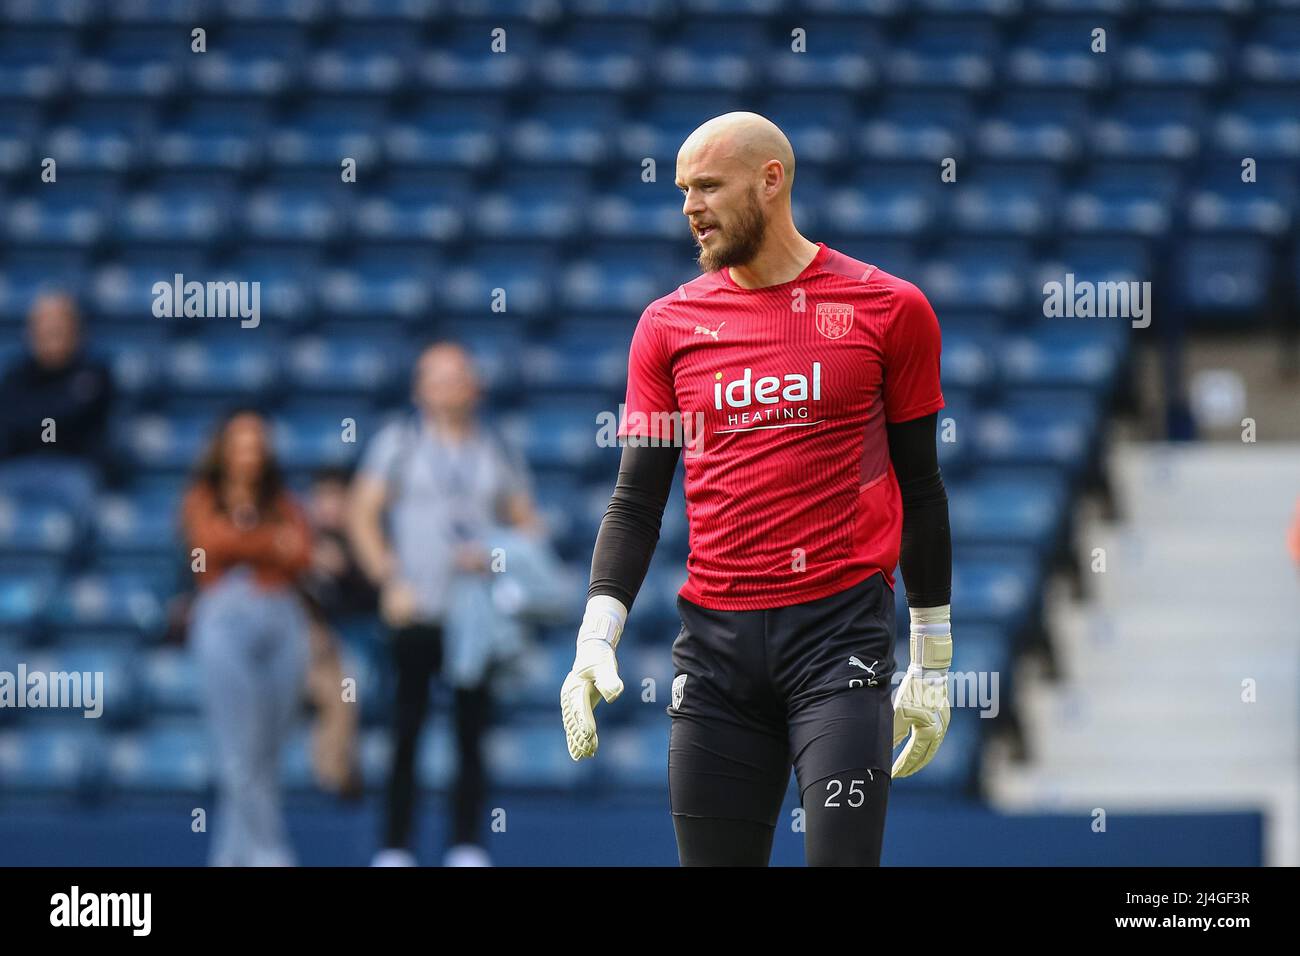 West Bromwich, UK. 15th Apr, 2022. David Button #25 of West Bromwich Albion warms up ahead of kick off in West Bromwich, United Kingdom on 4/15/2022. (Photo by Gareth Evans/News Images/Sipa USA) Credit: Sipa USA/Alamy Live News Stock Photo